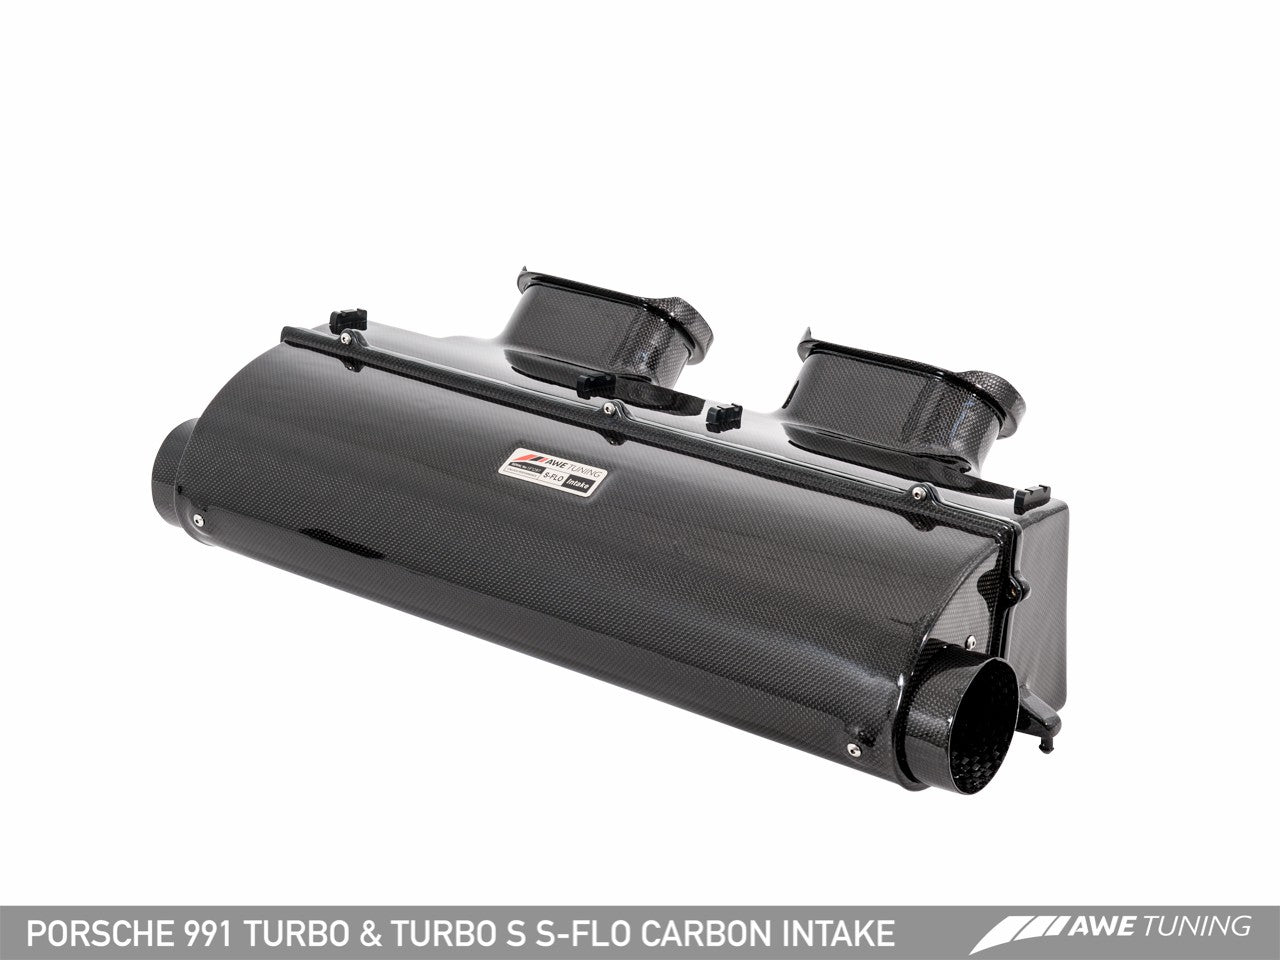 AWE S-FLO Carbon Intake for Porsche 991 Turbo and Turbo S